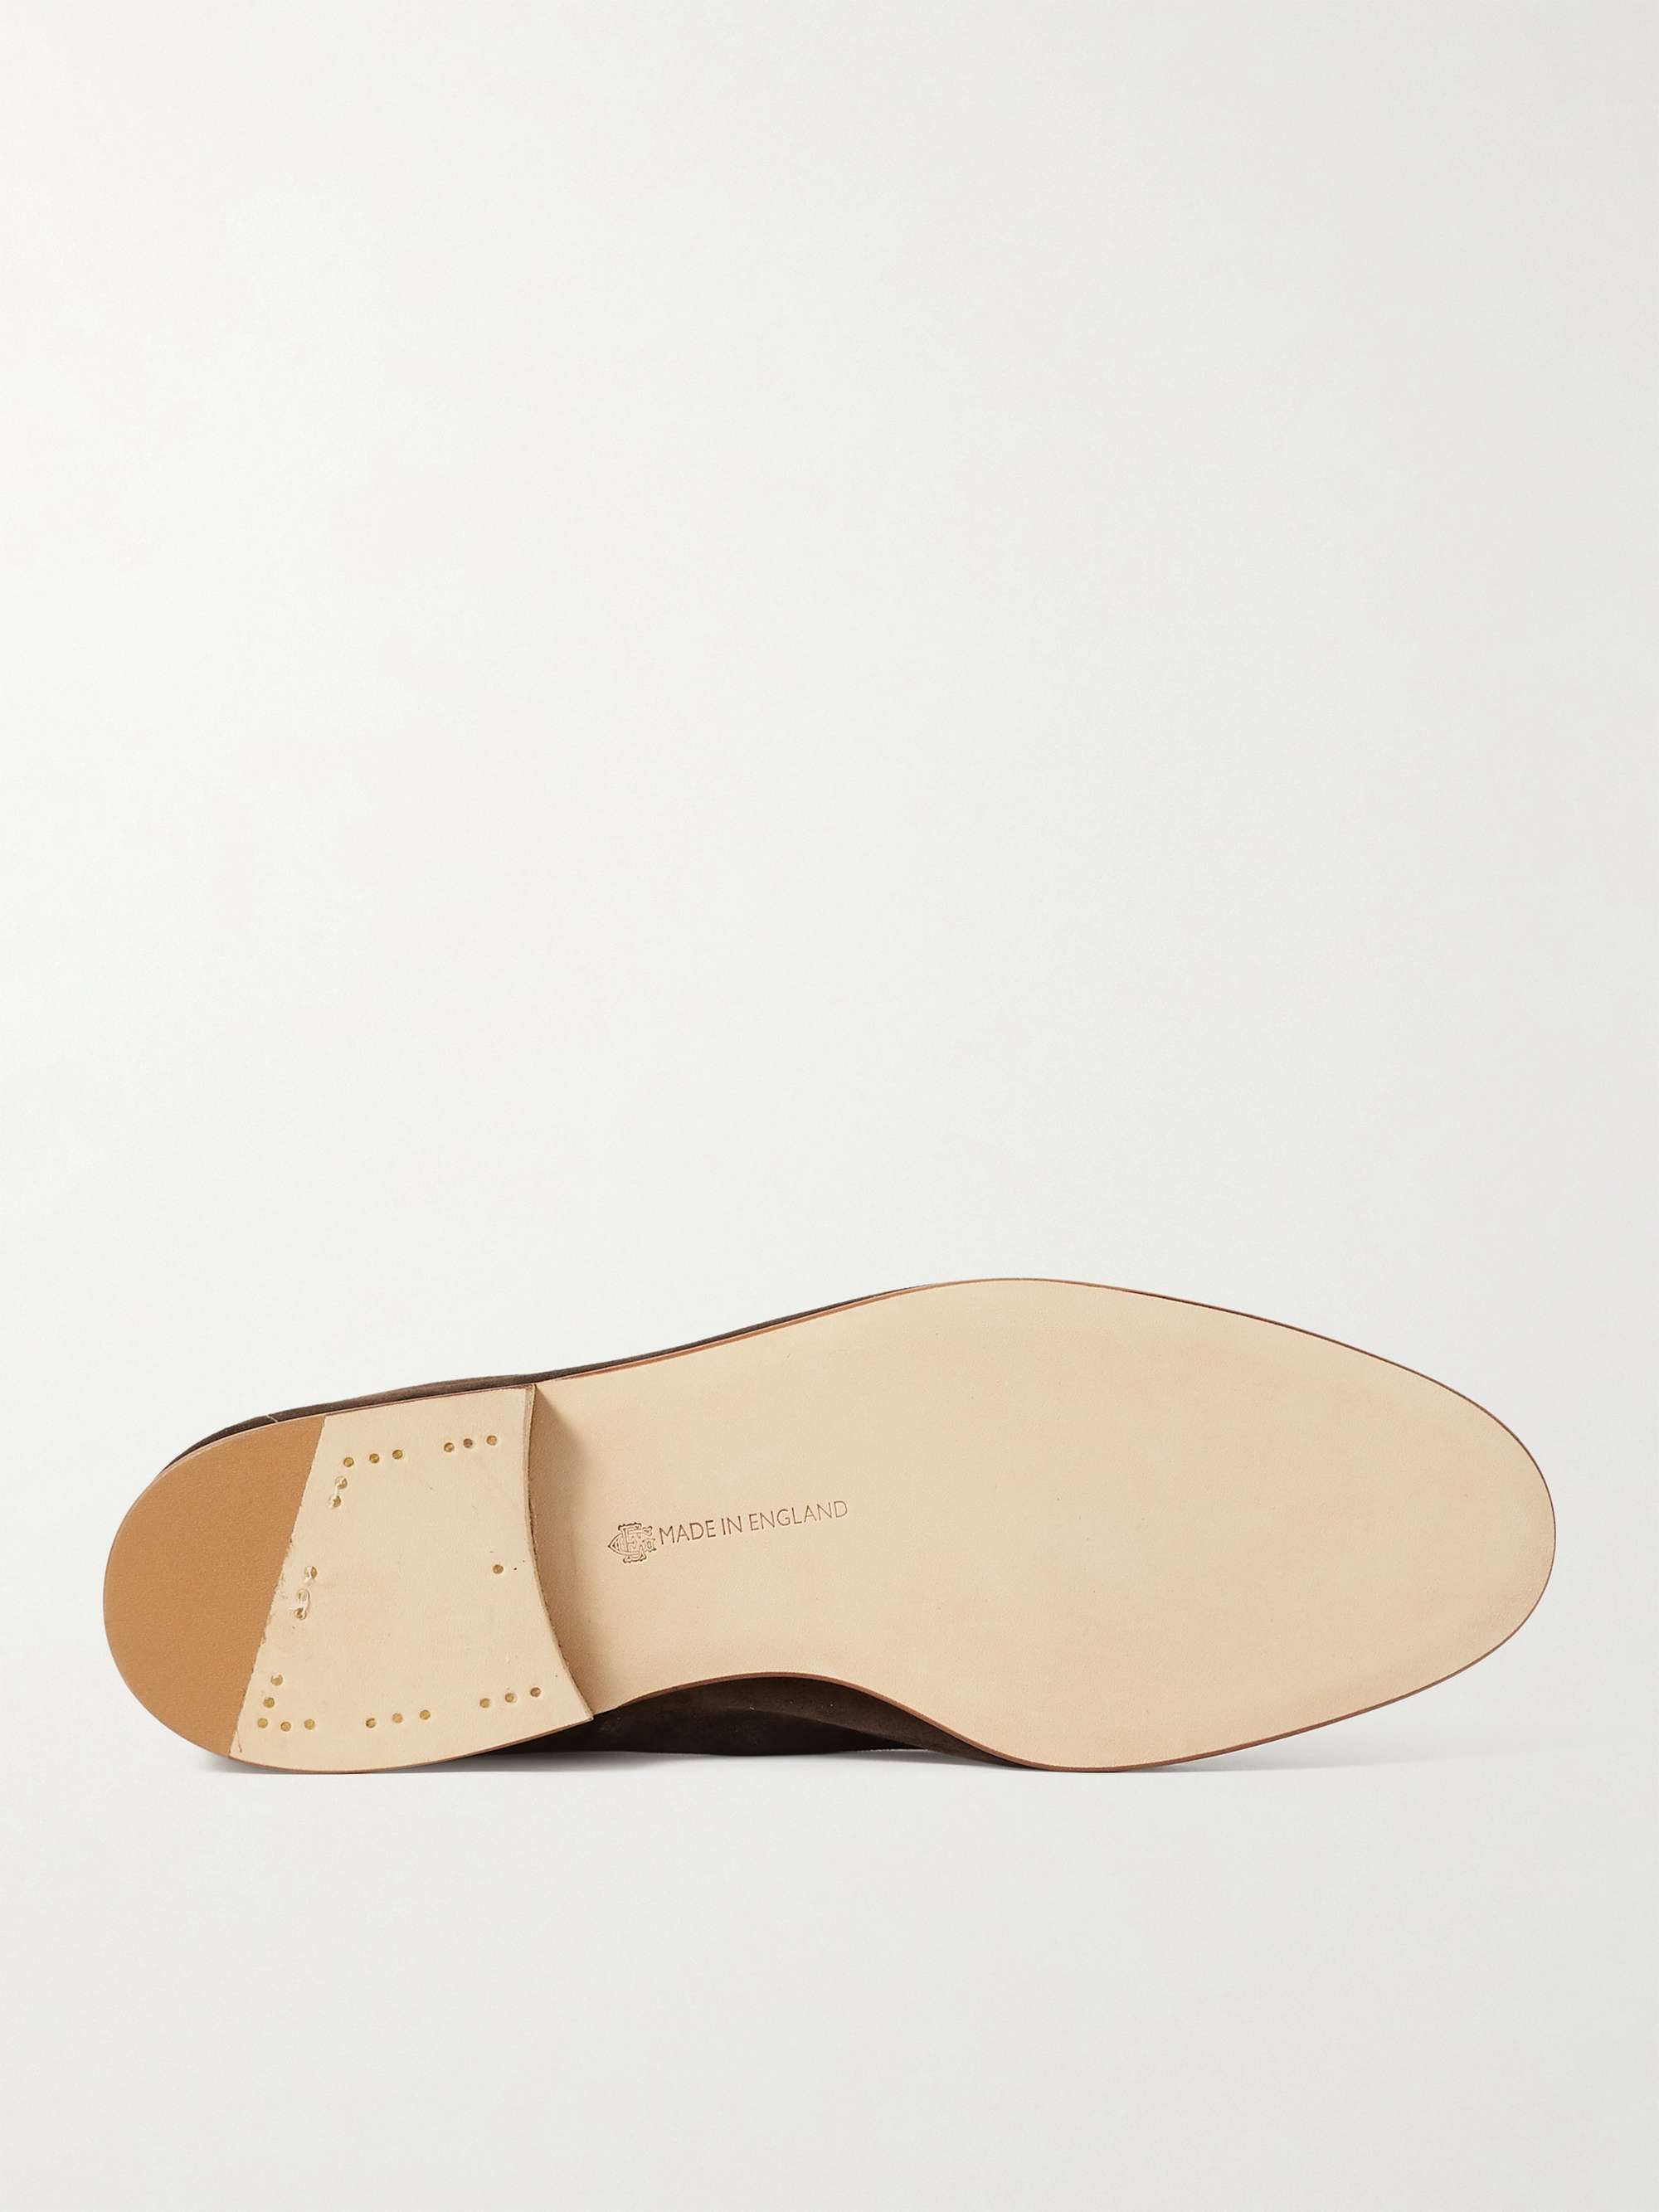 EDWARD GREEN Padstow Suede Loafers